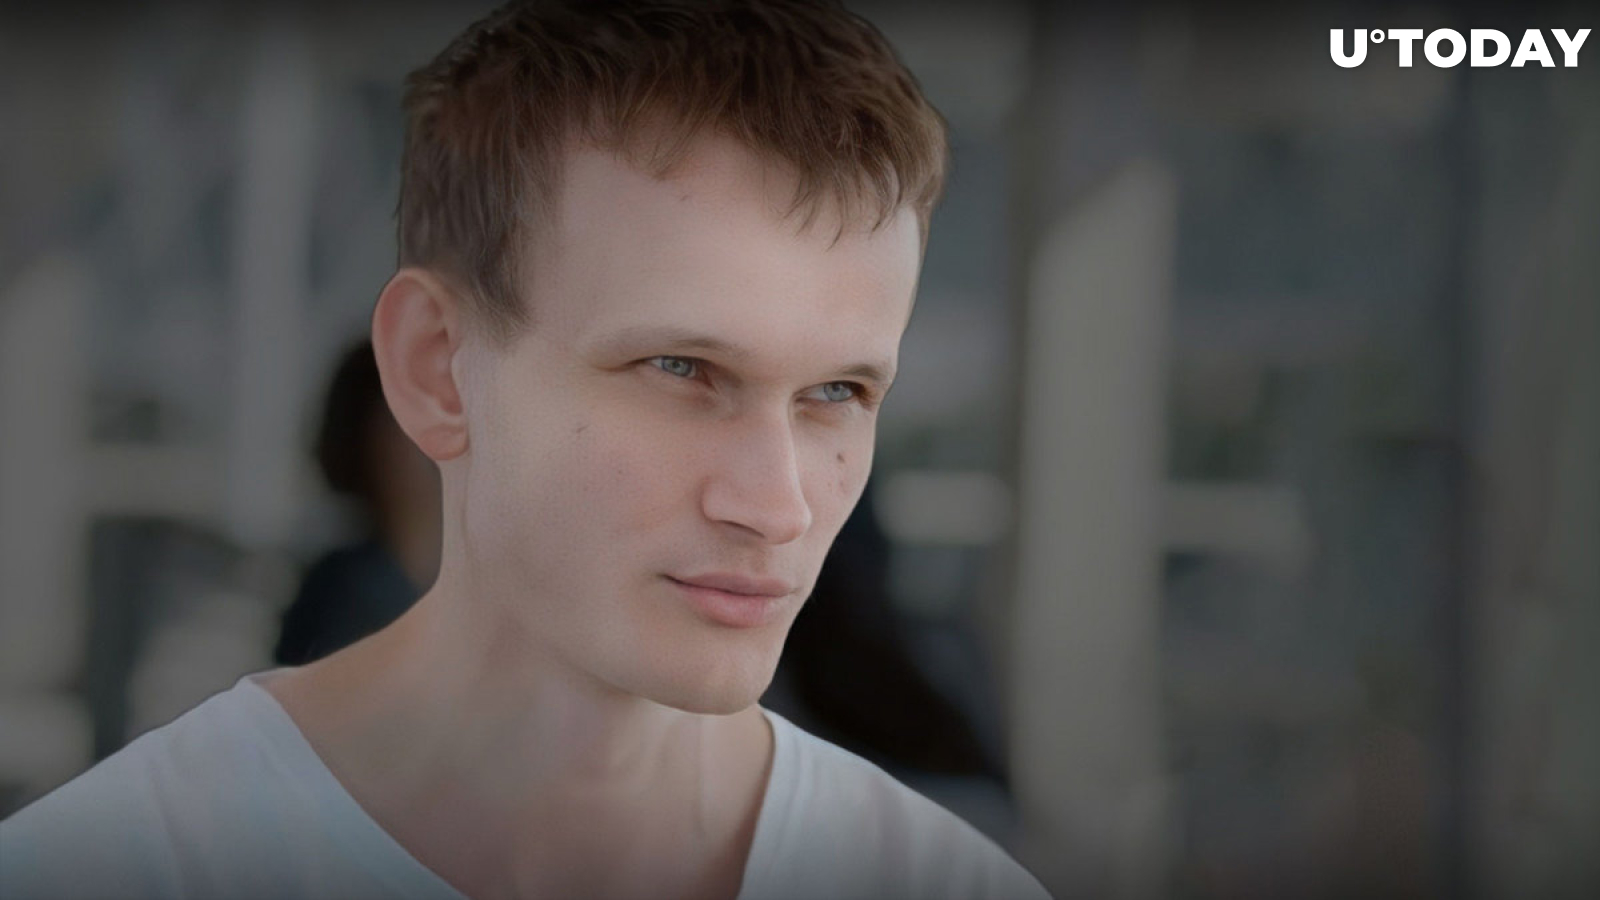 Ethereum (ETH) Founder Vitalik Buterin Indicates Third Pillar of Ethereum (ETH) After Rollups and AA